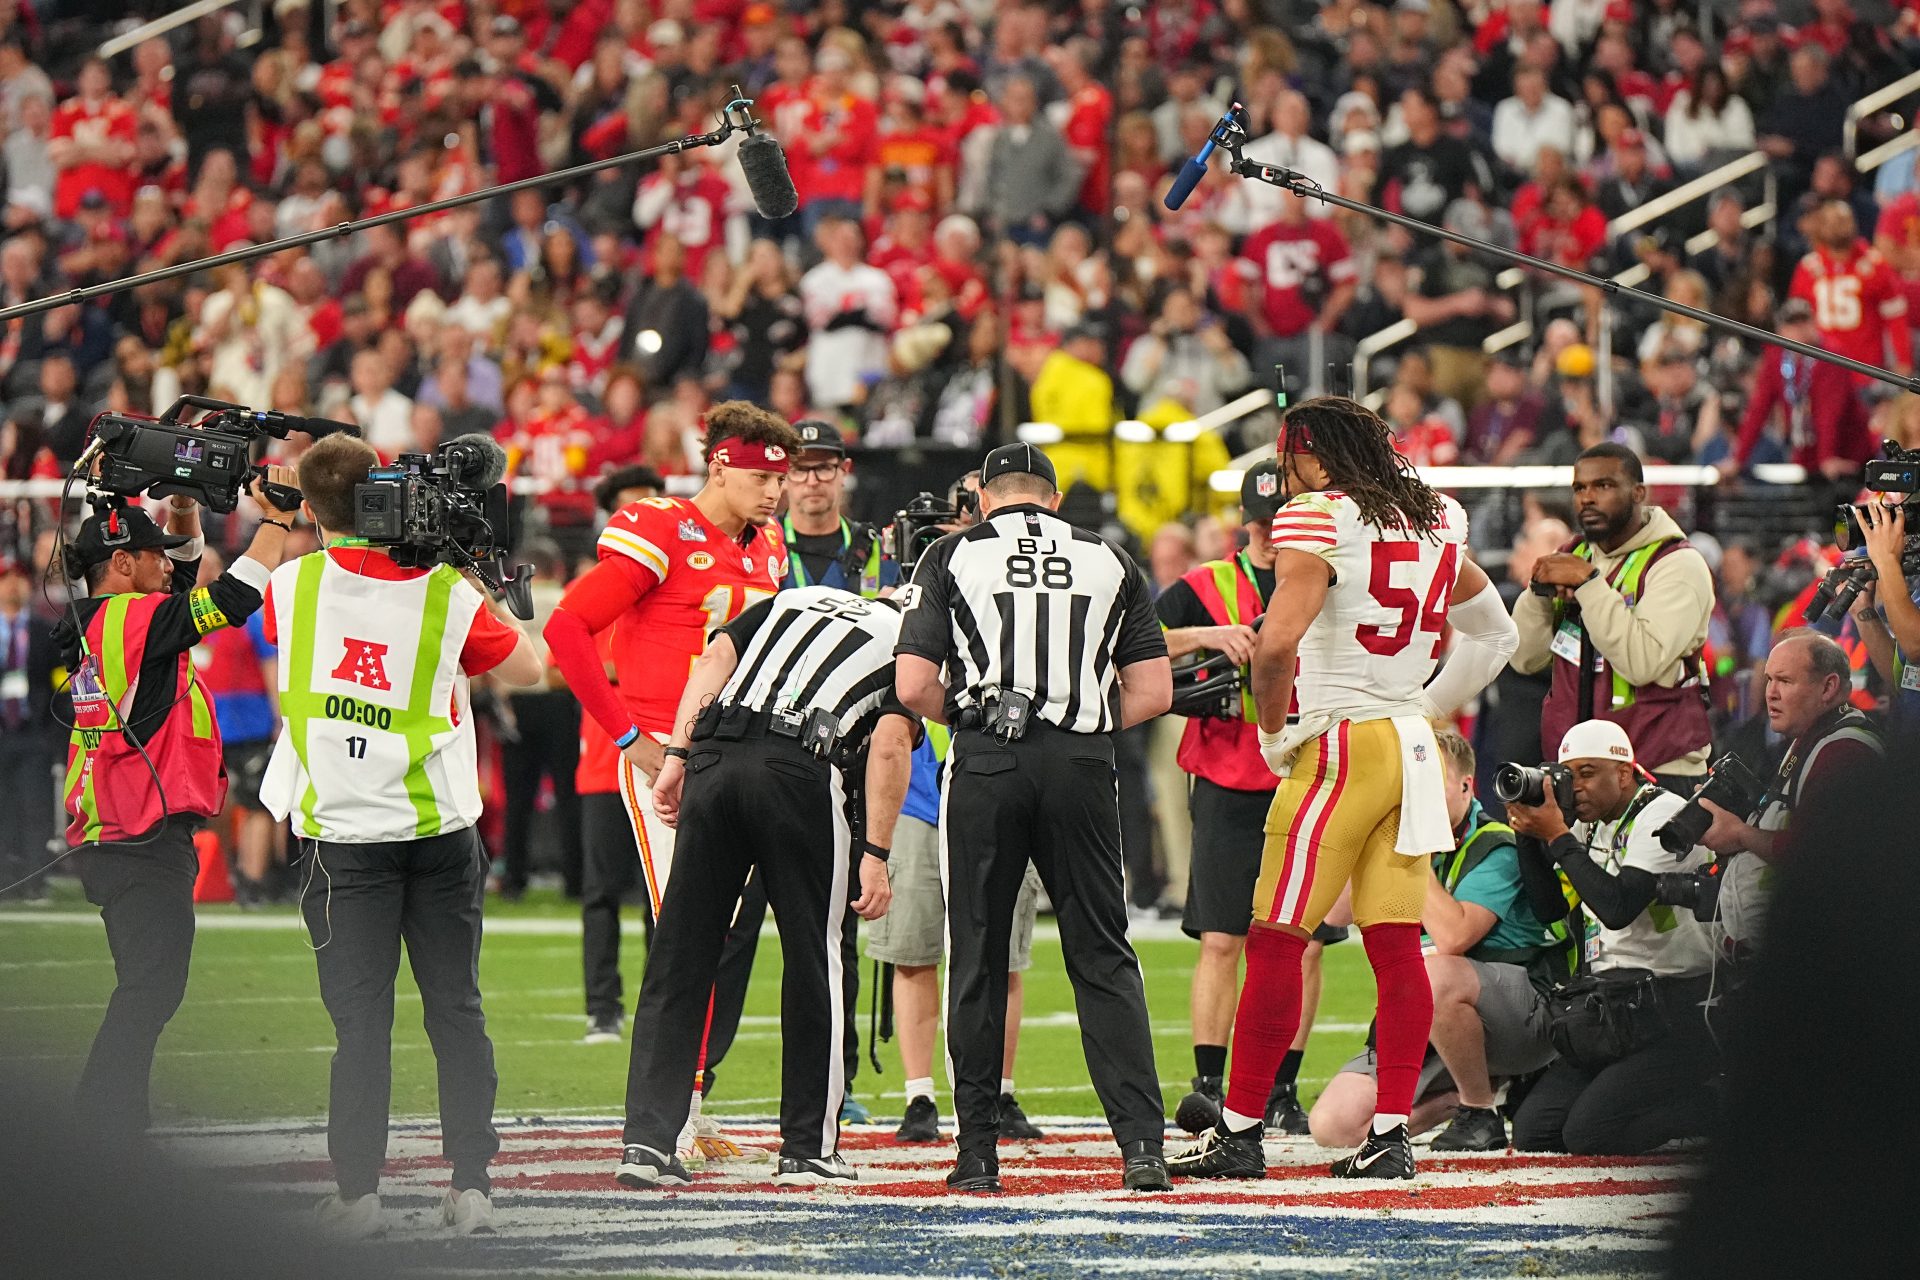 2: The Niners decide to receive